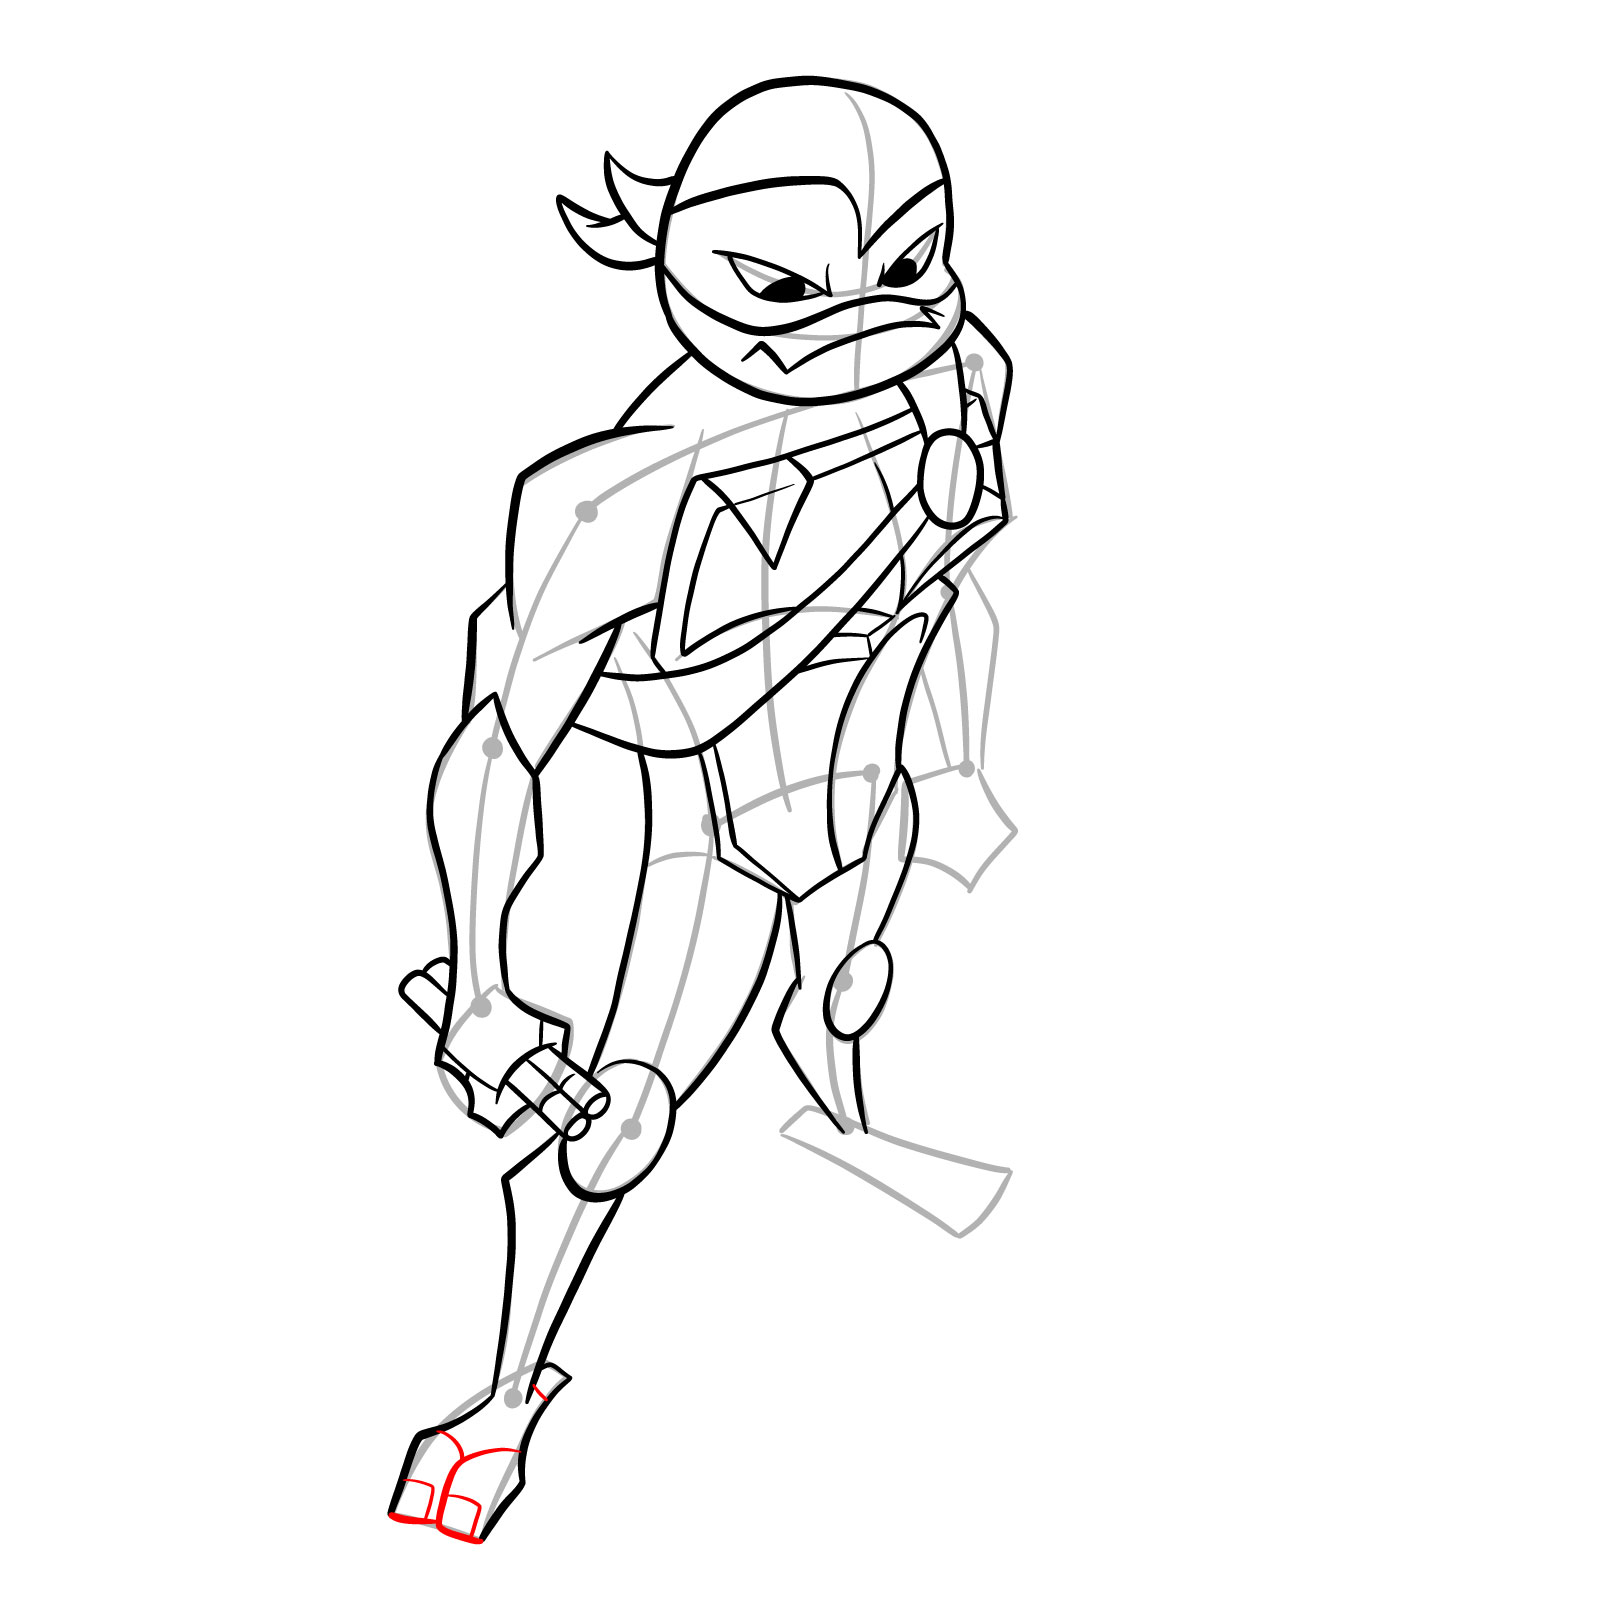 How to draw Mikey in Hamato Ninpō state - step 27